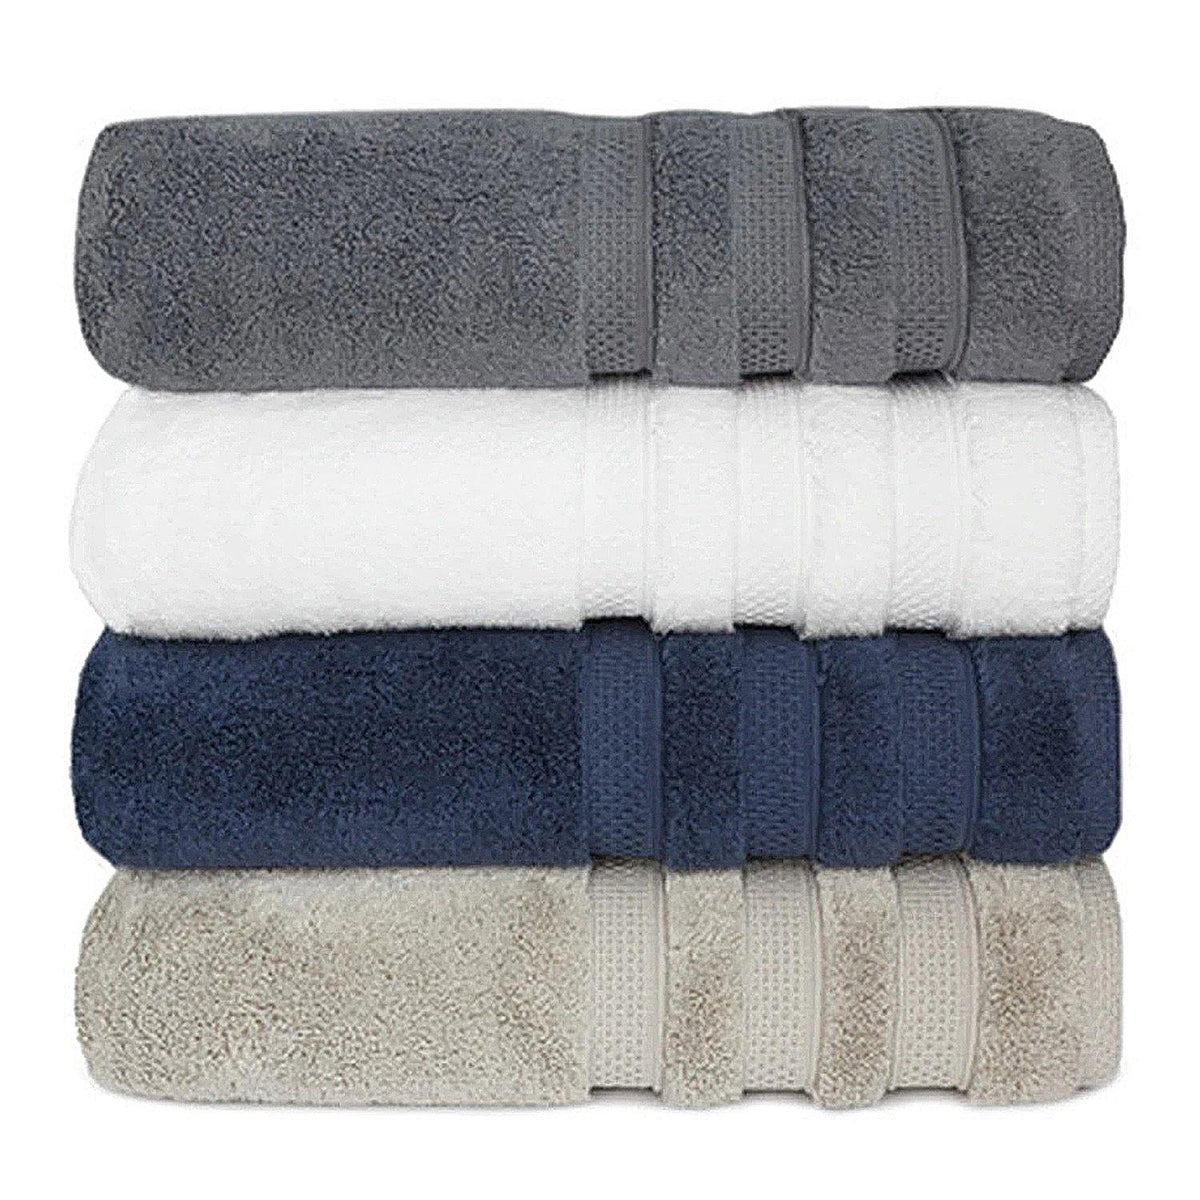 Lavish Touch 700 GSM Egyptian-Quality Cotton Pack of 4 Bath Towels